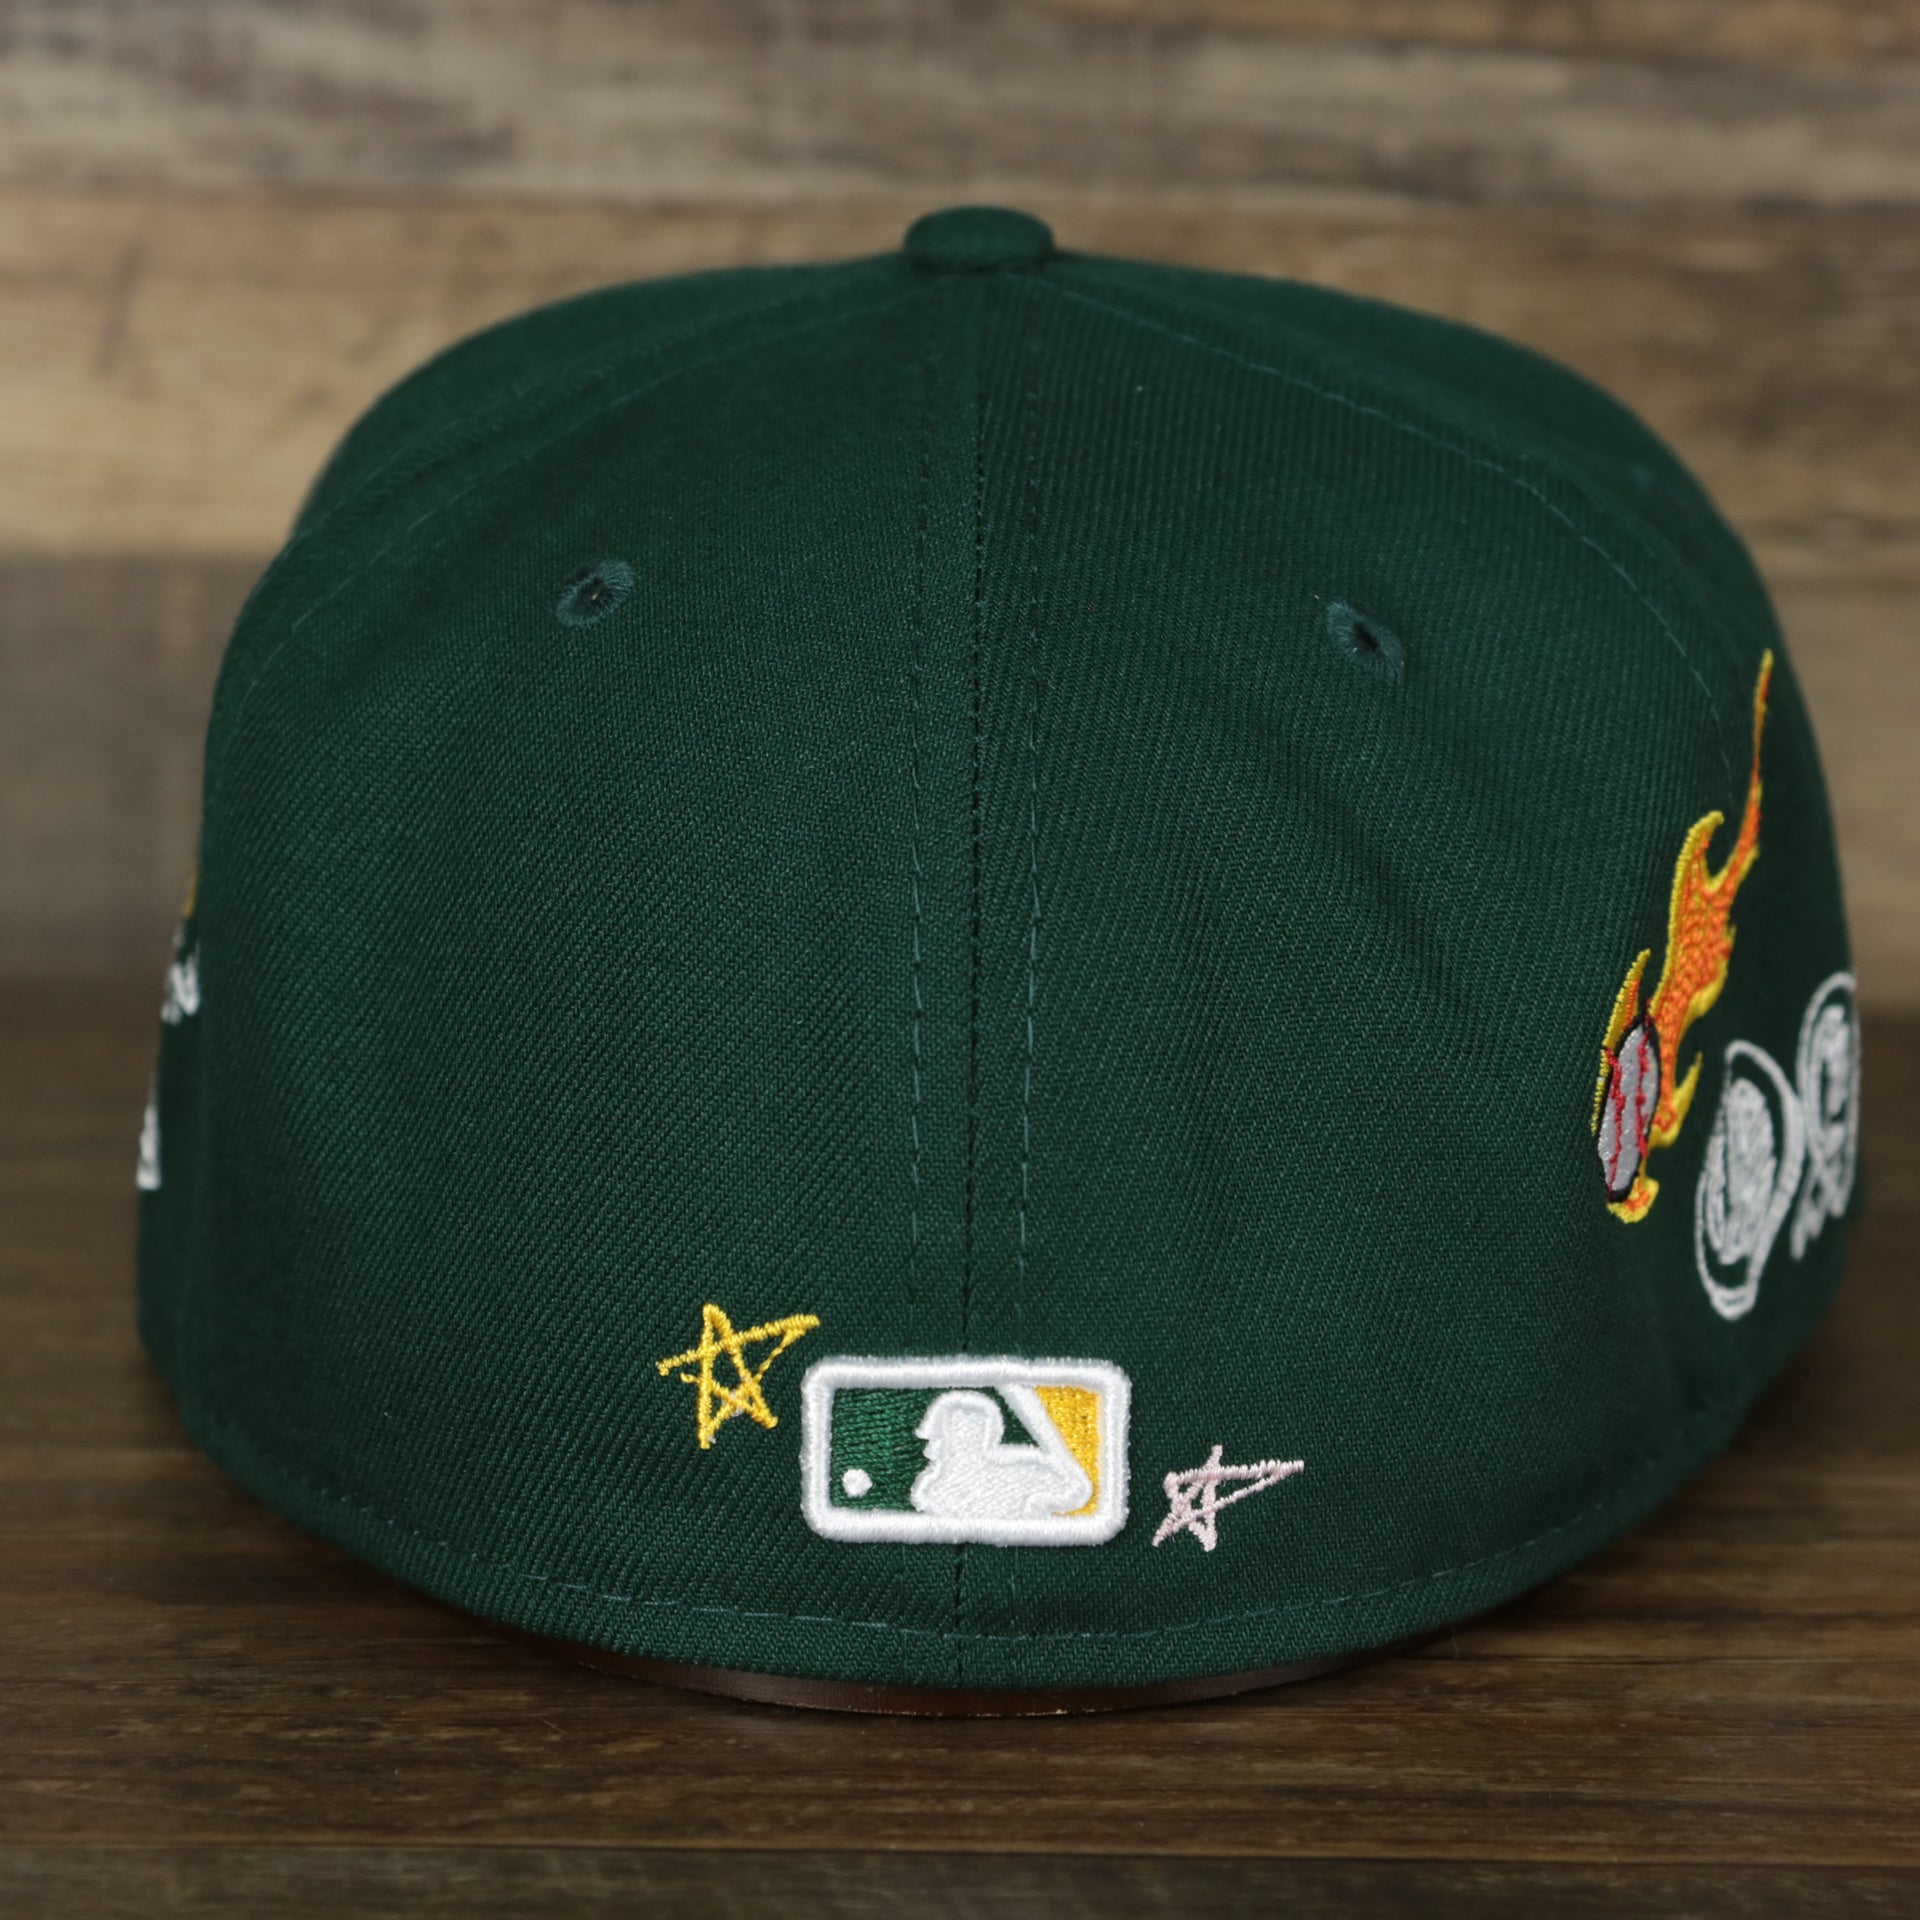 The backside of the Oakland Athletics “Scribble” Side Patch Gray Bottom 59Fifty Fitted Cap